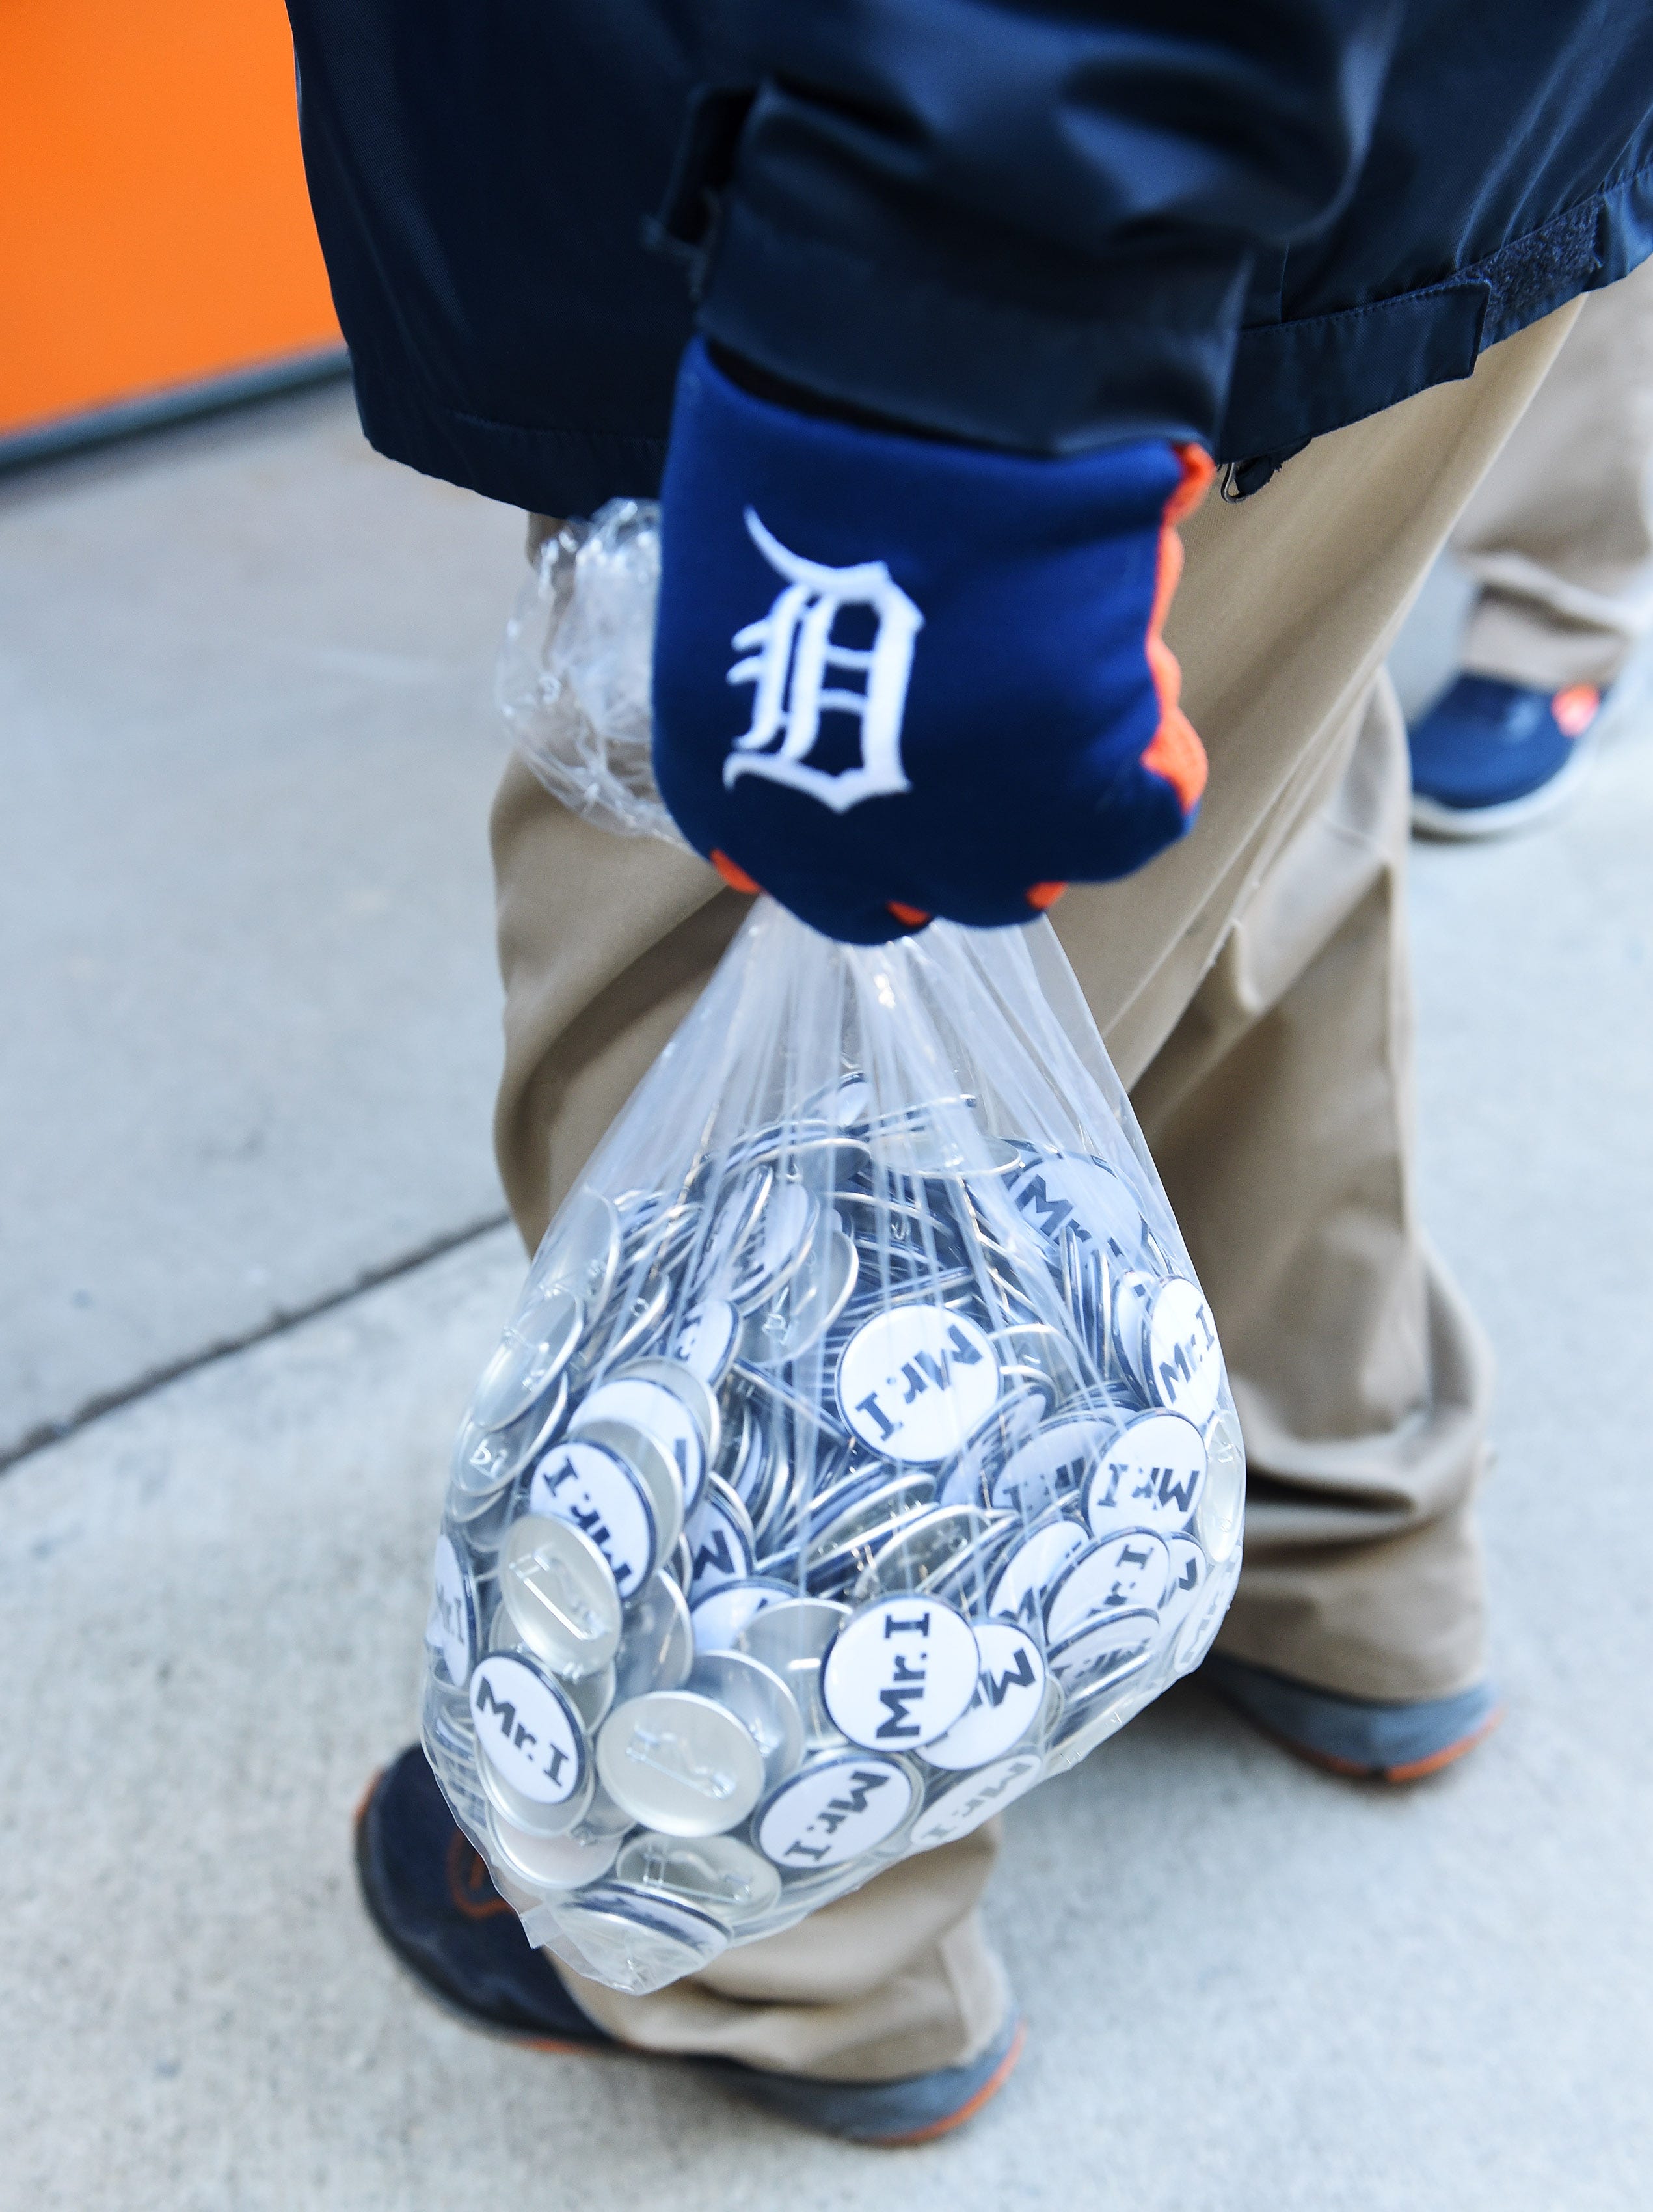 A bag of 'Mr. I' pins to be given out to fans when they enter the gates. Detroit Tigers Opening Day at Comerica Park in Detroit on April 7, 2017.